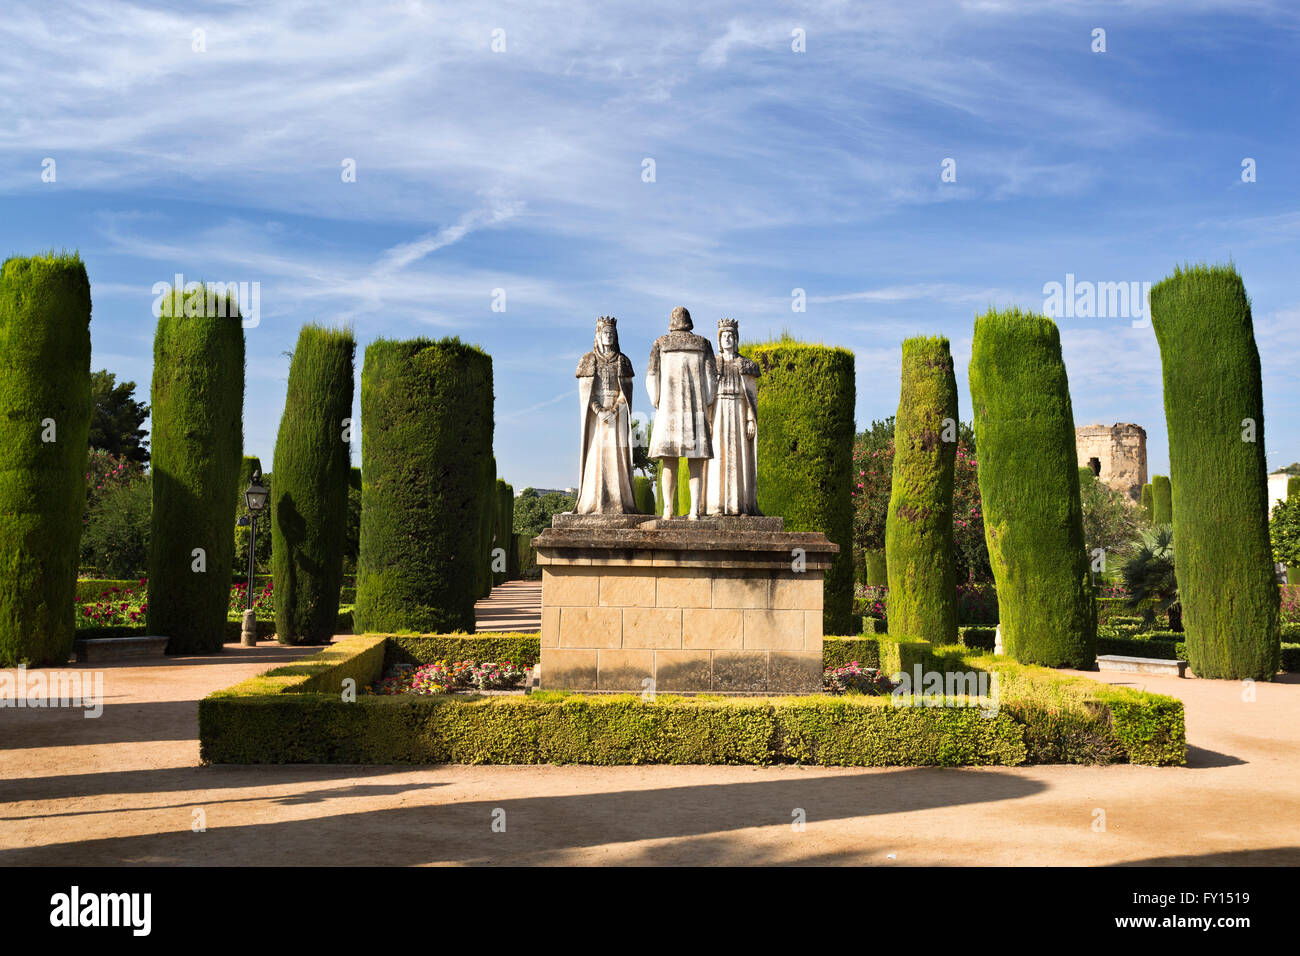 Statues of the Catholic Monarchs (Ferdinand and Isabella) and Christopher Columbus in the gardens of the Alcazar de Cordoba, Spa Stock Photo